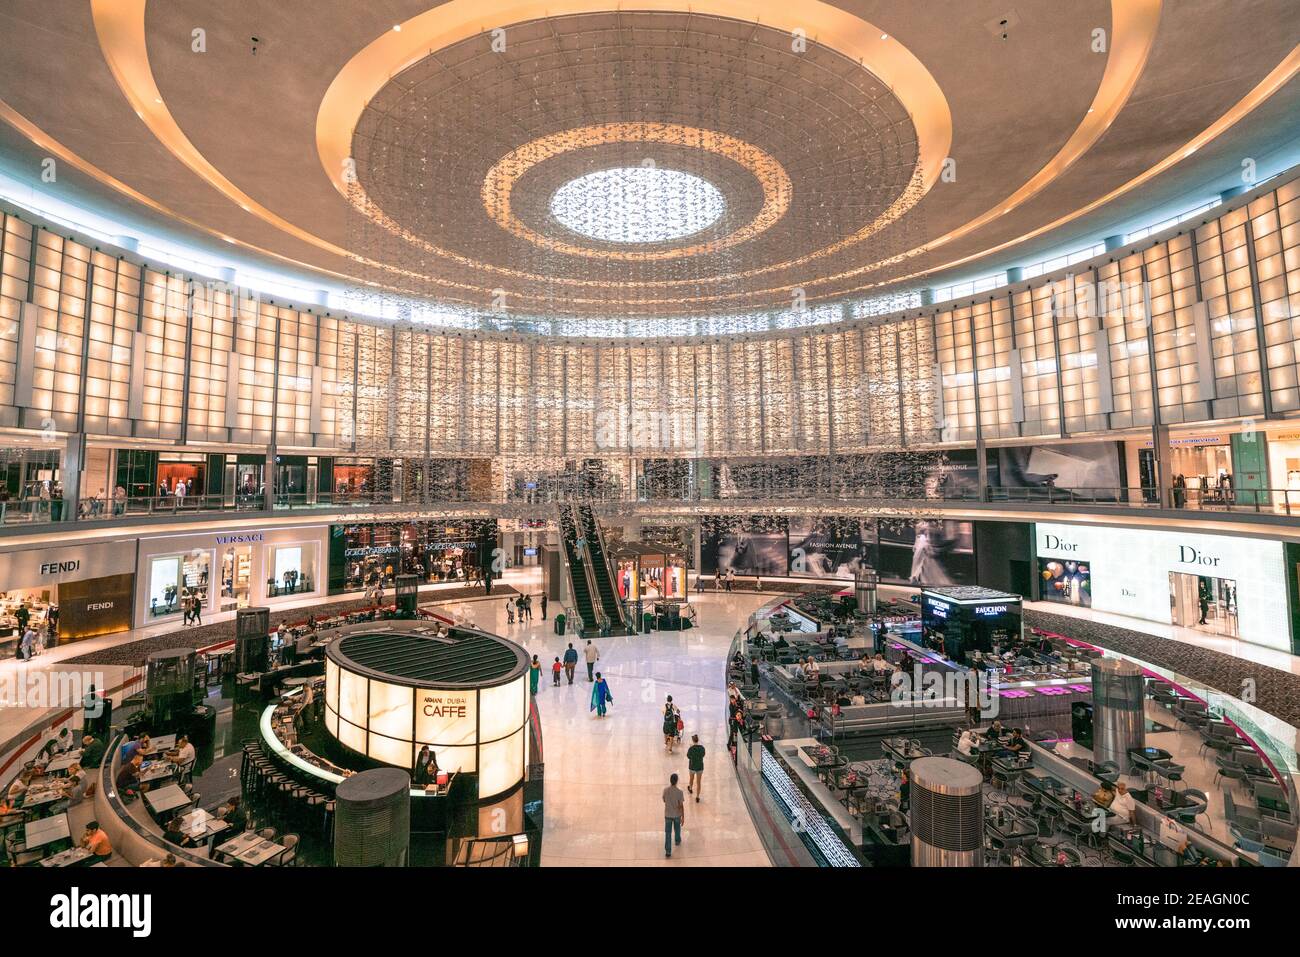 Dubai, UAE - 12.01.2019: People walking by and shopping inside of the Dubai Mall. Several shopping floors, busy as usual. Stock Photo